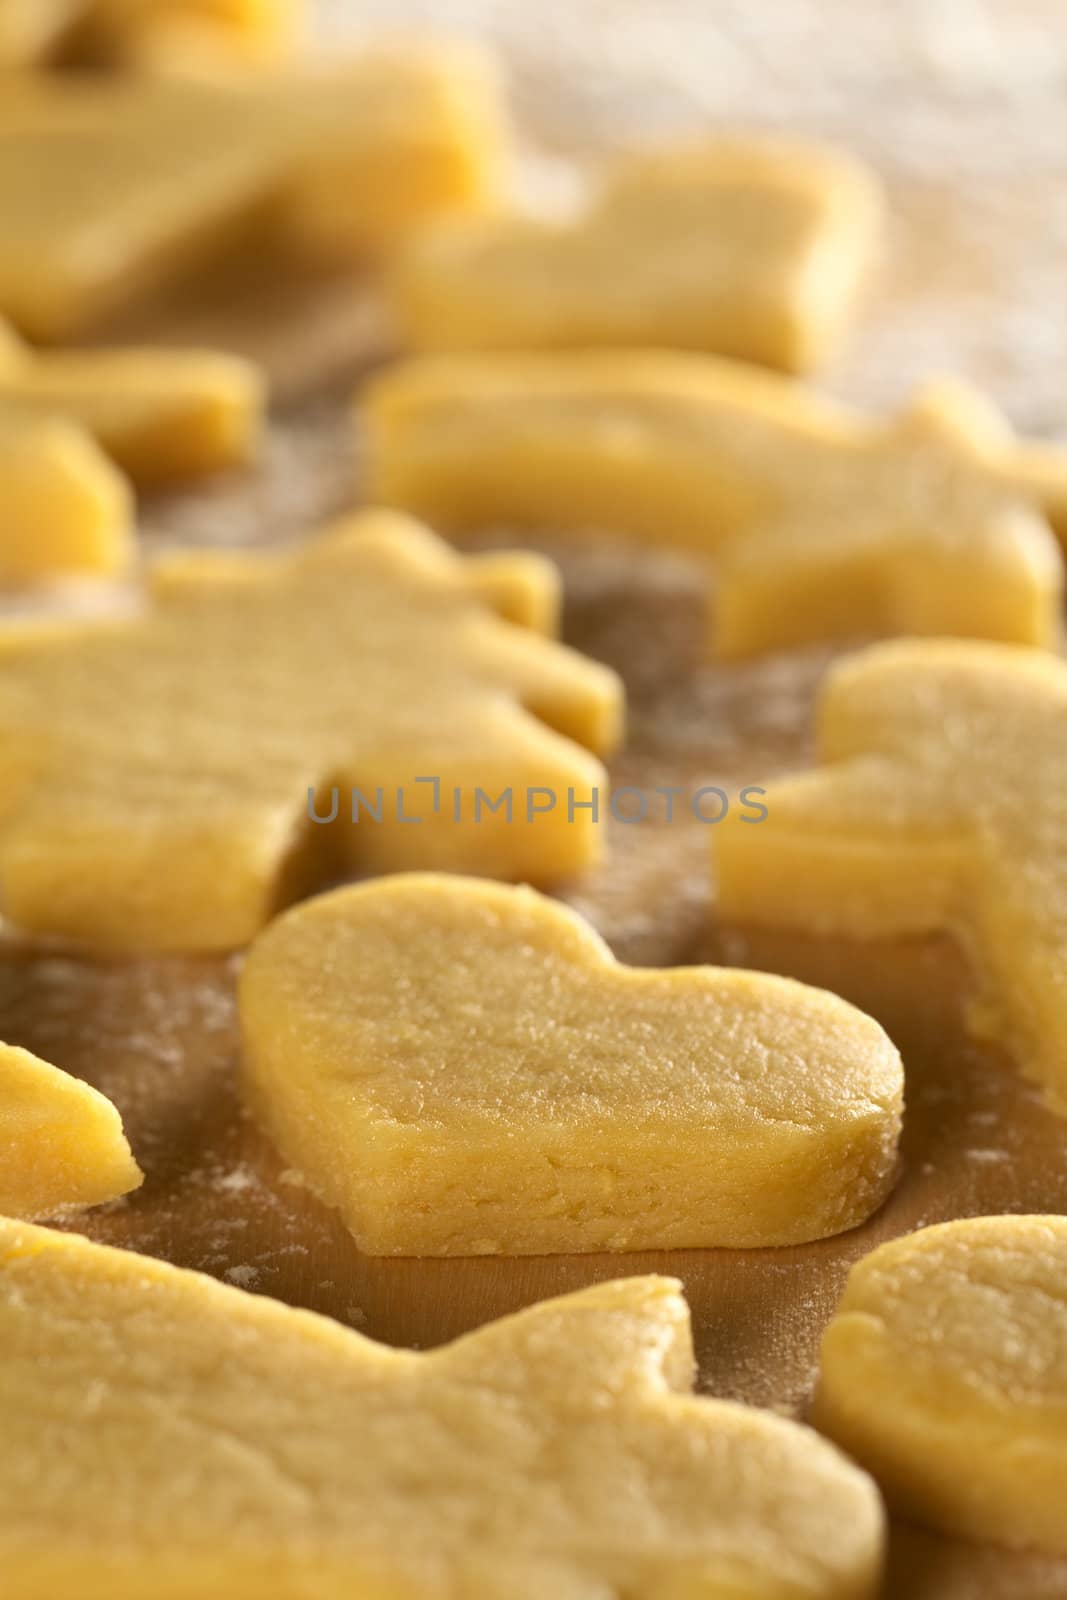 Unbaked Christmas cookies on floured wooden surface (Selective Focus, Focus on the front upper edge of the heart shaped cookie)